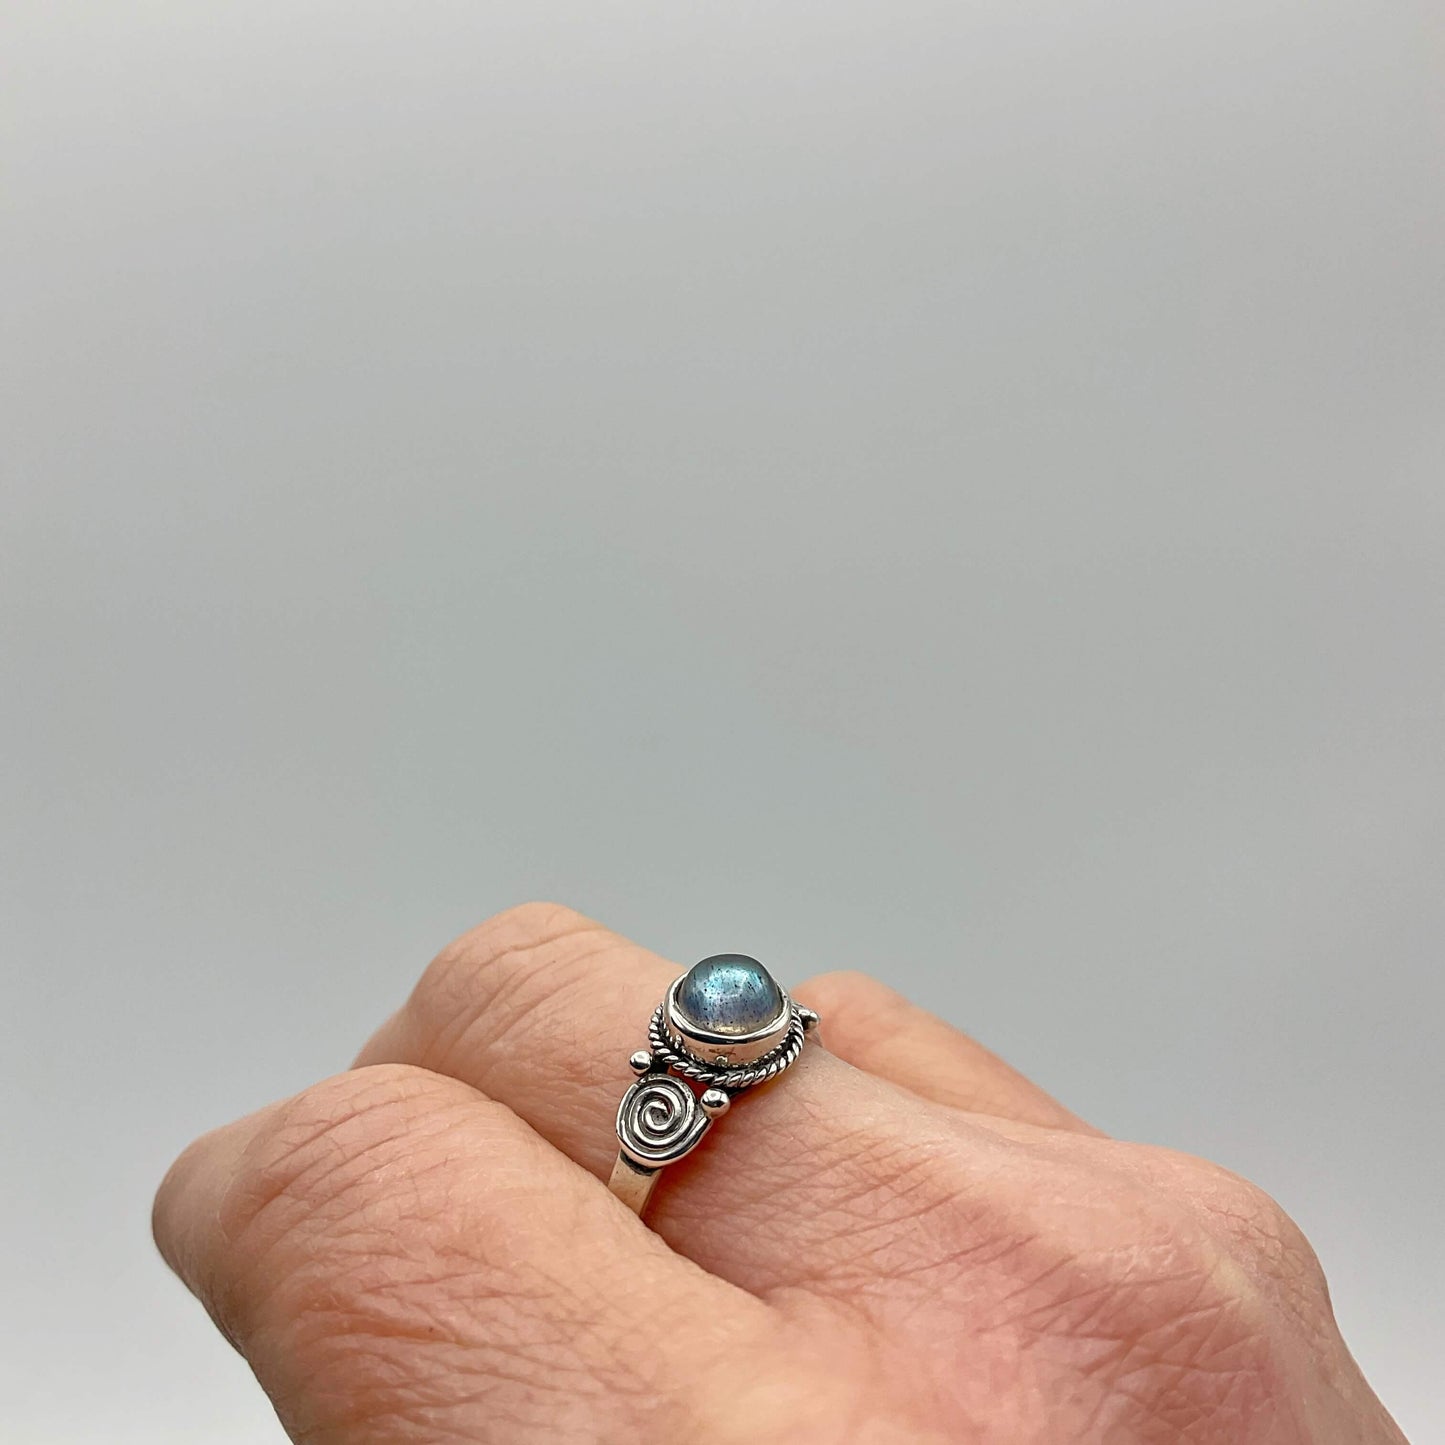 A beautiful blue moonstone silver ring on a finger